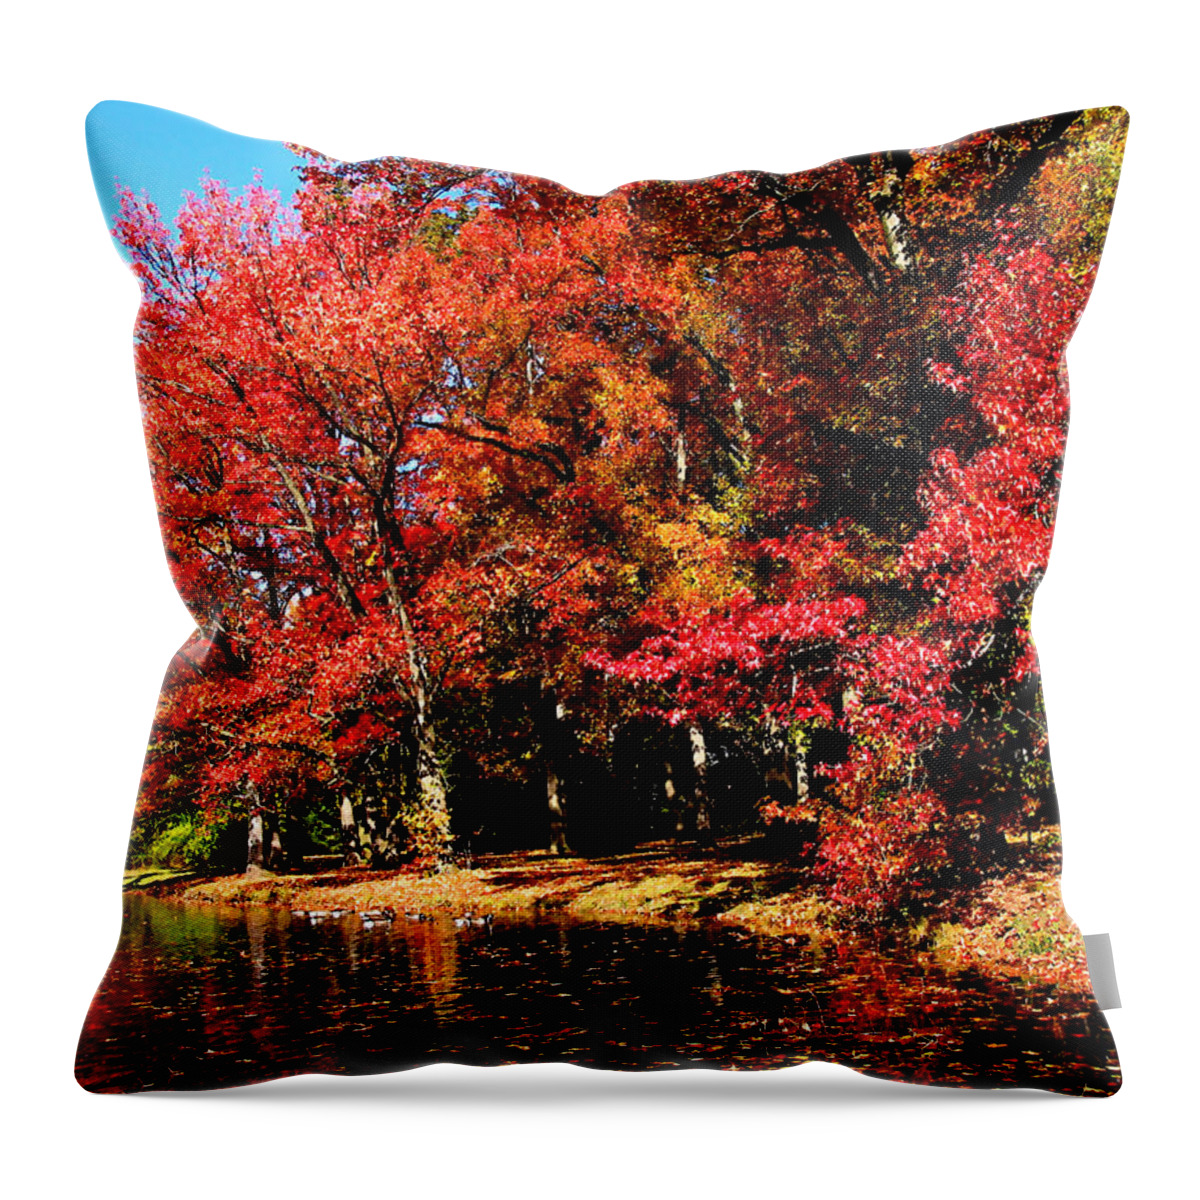 Autumn Throw Pillow featuring the photograph Red Trees by Lake by Susan Savad